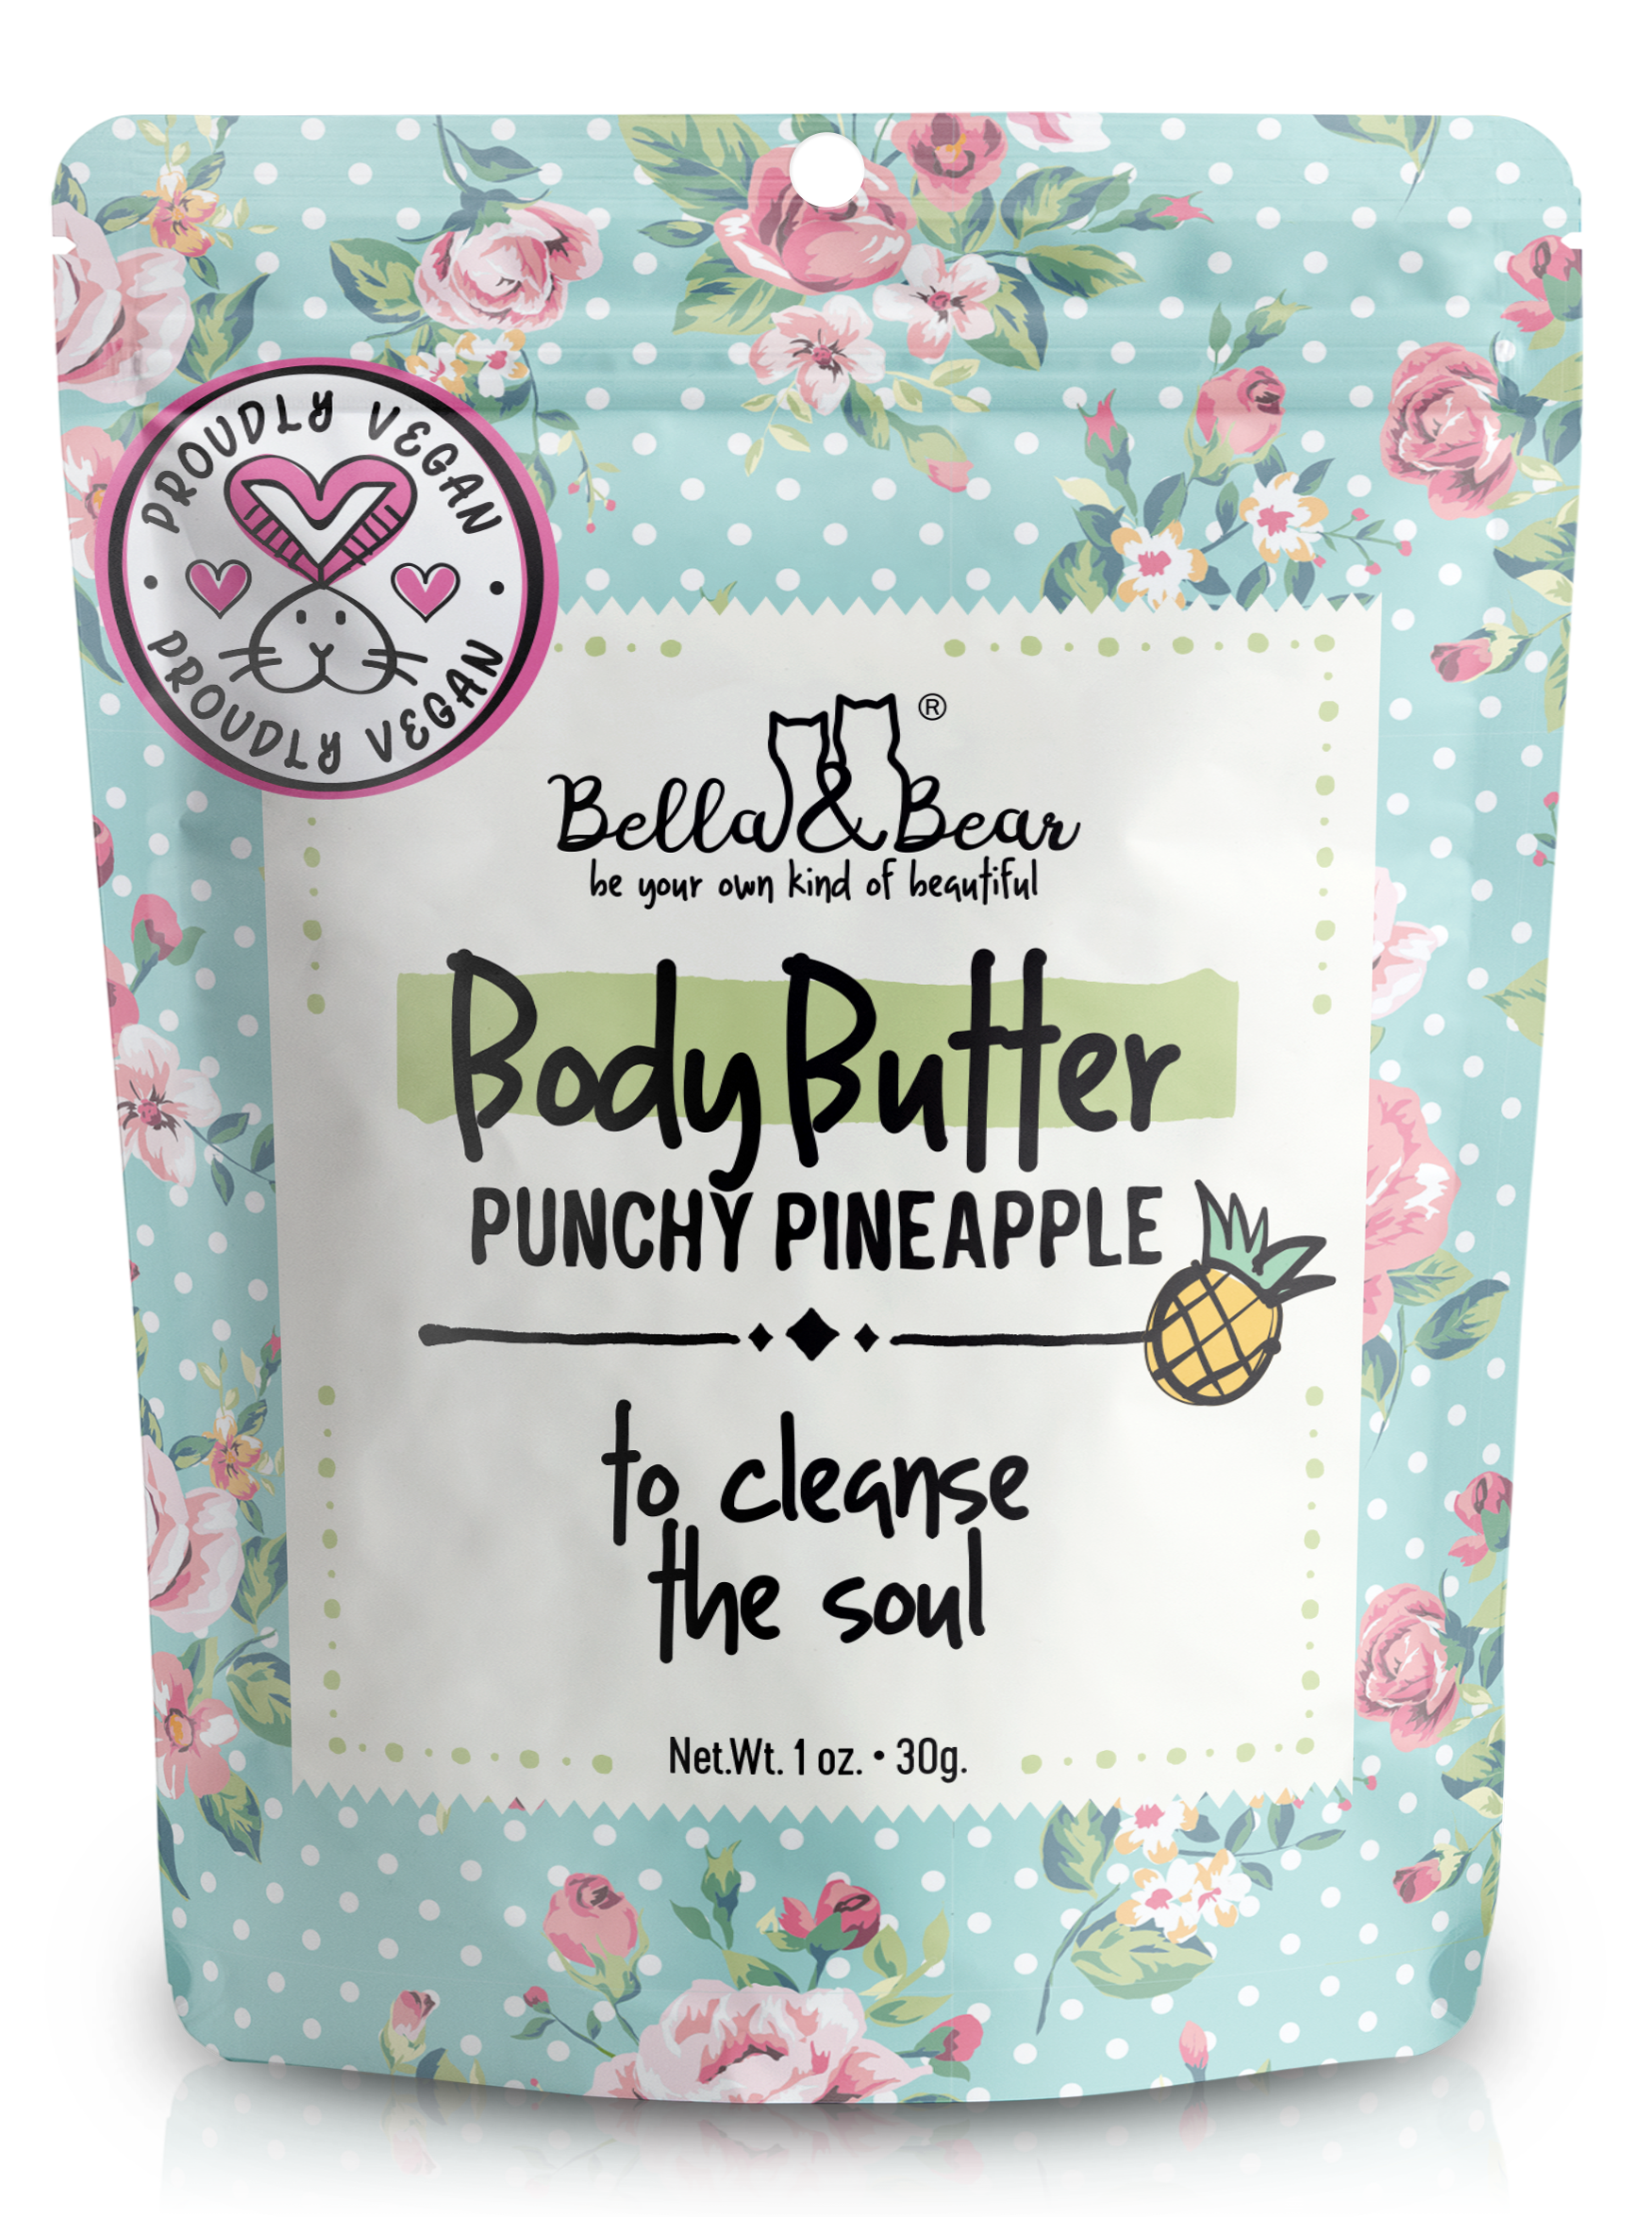 Pineapple Punch Pamper Pack